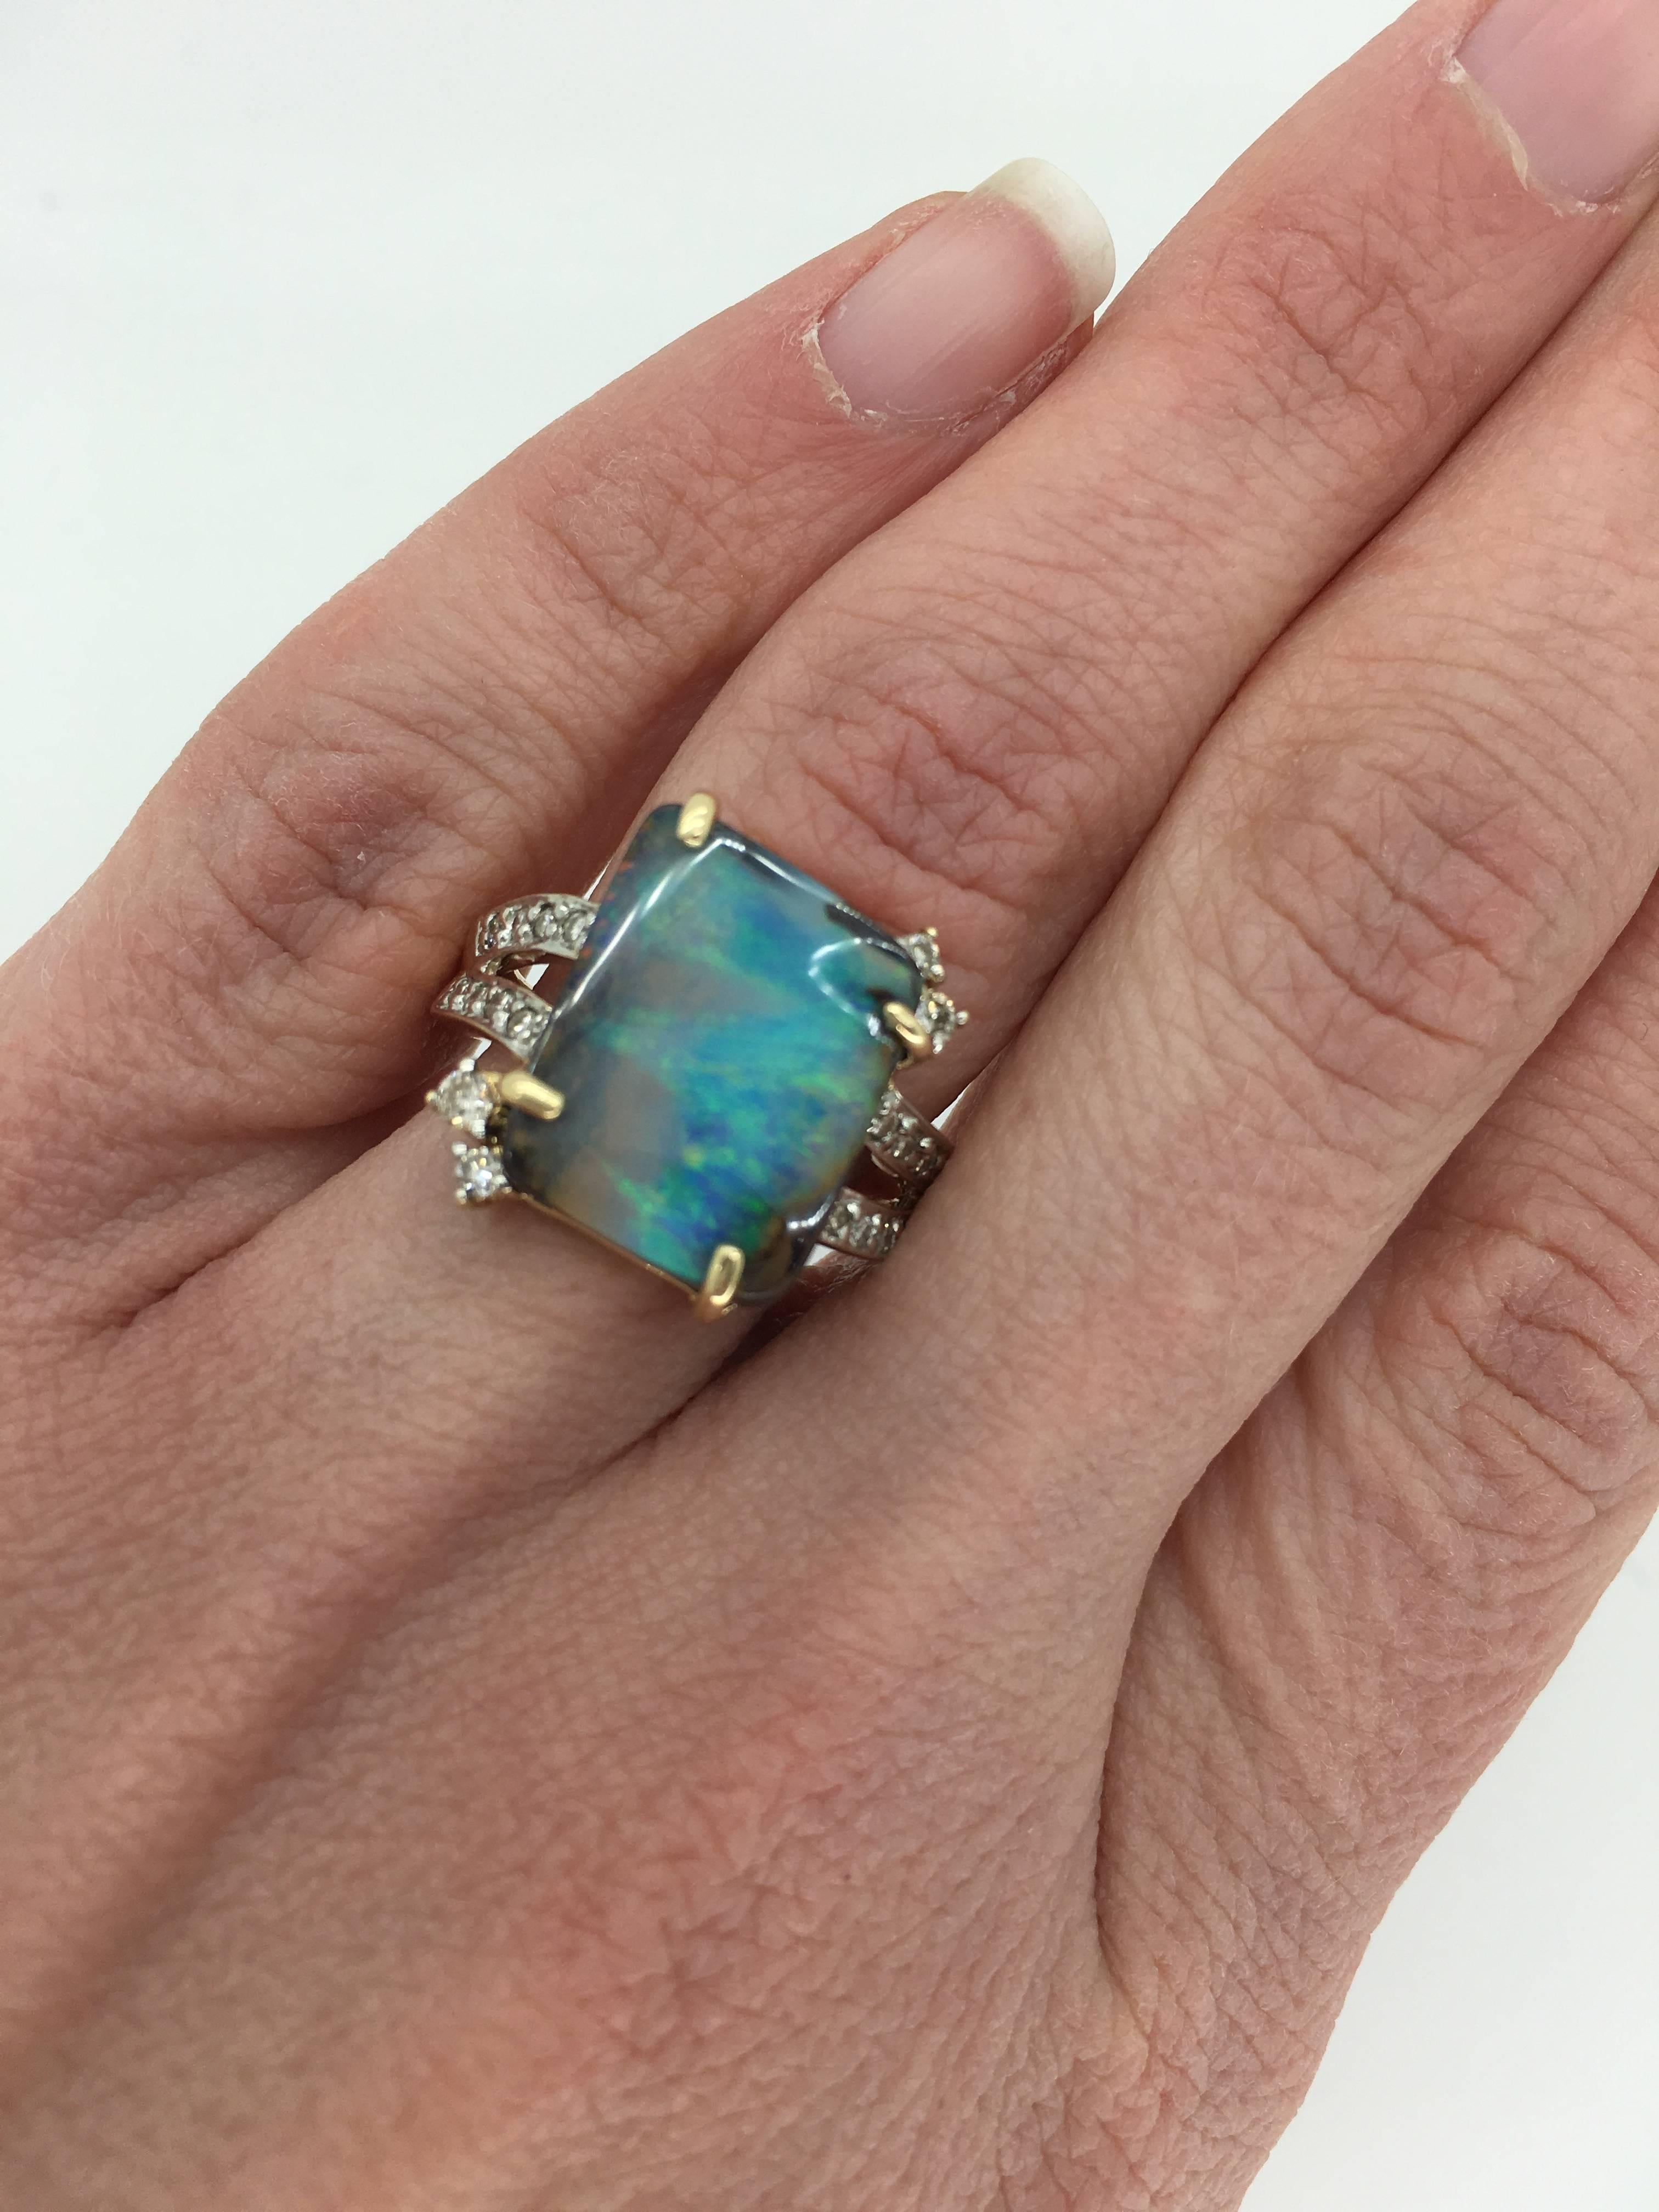 Custom made Opal ring features an approximately 14.25x11.45mm Rectangular Cut Opal accented by approximately .25ctw of diamonds. The 14K two-tone gold ring is currently a size 7 and weighs 5.6 grams.